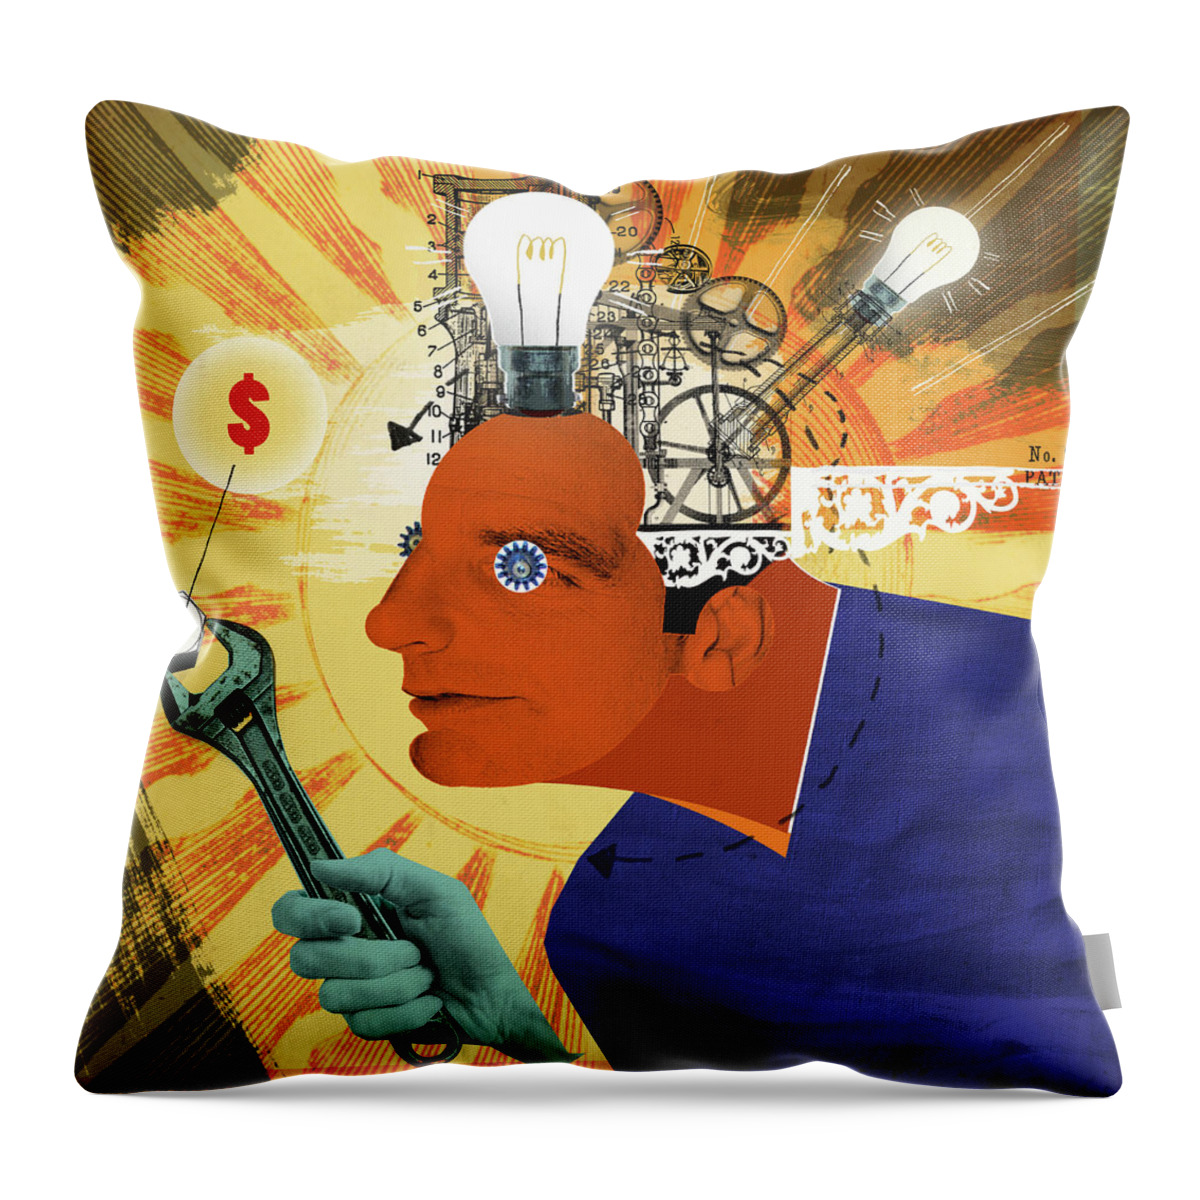 30-35 Throw Pillow featuring the photograph Light Bulbs And Cogs Inside Of Head #2 by Ikon Ikon Images